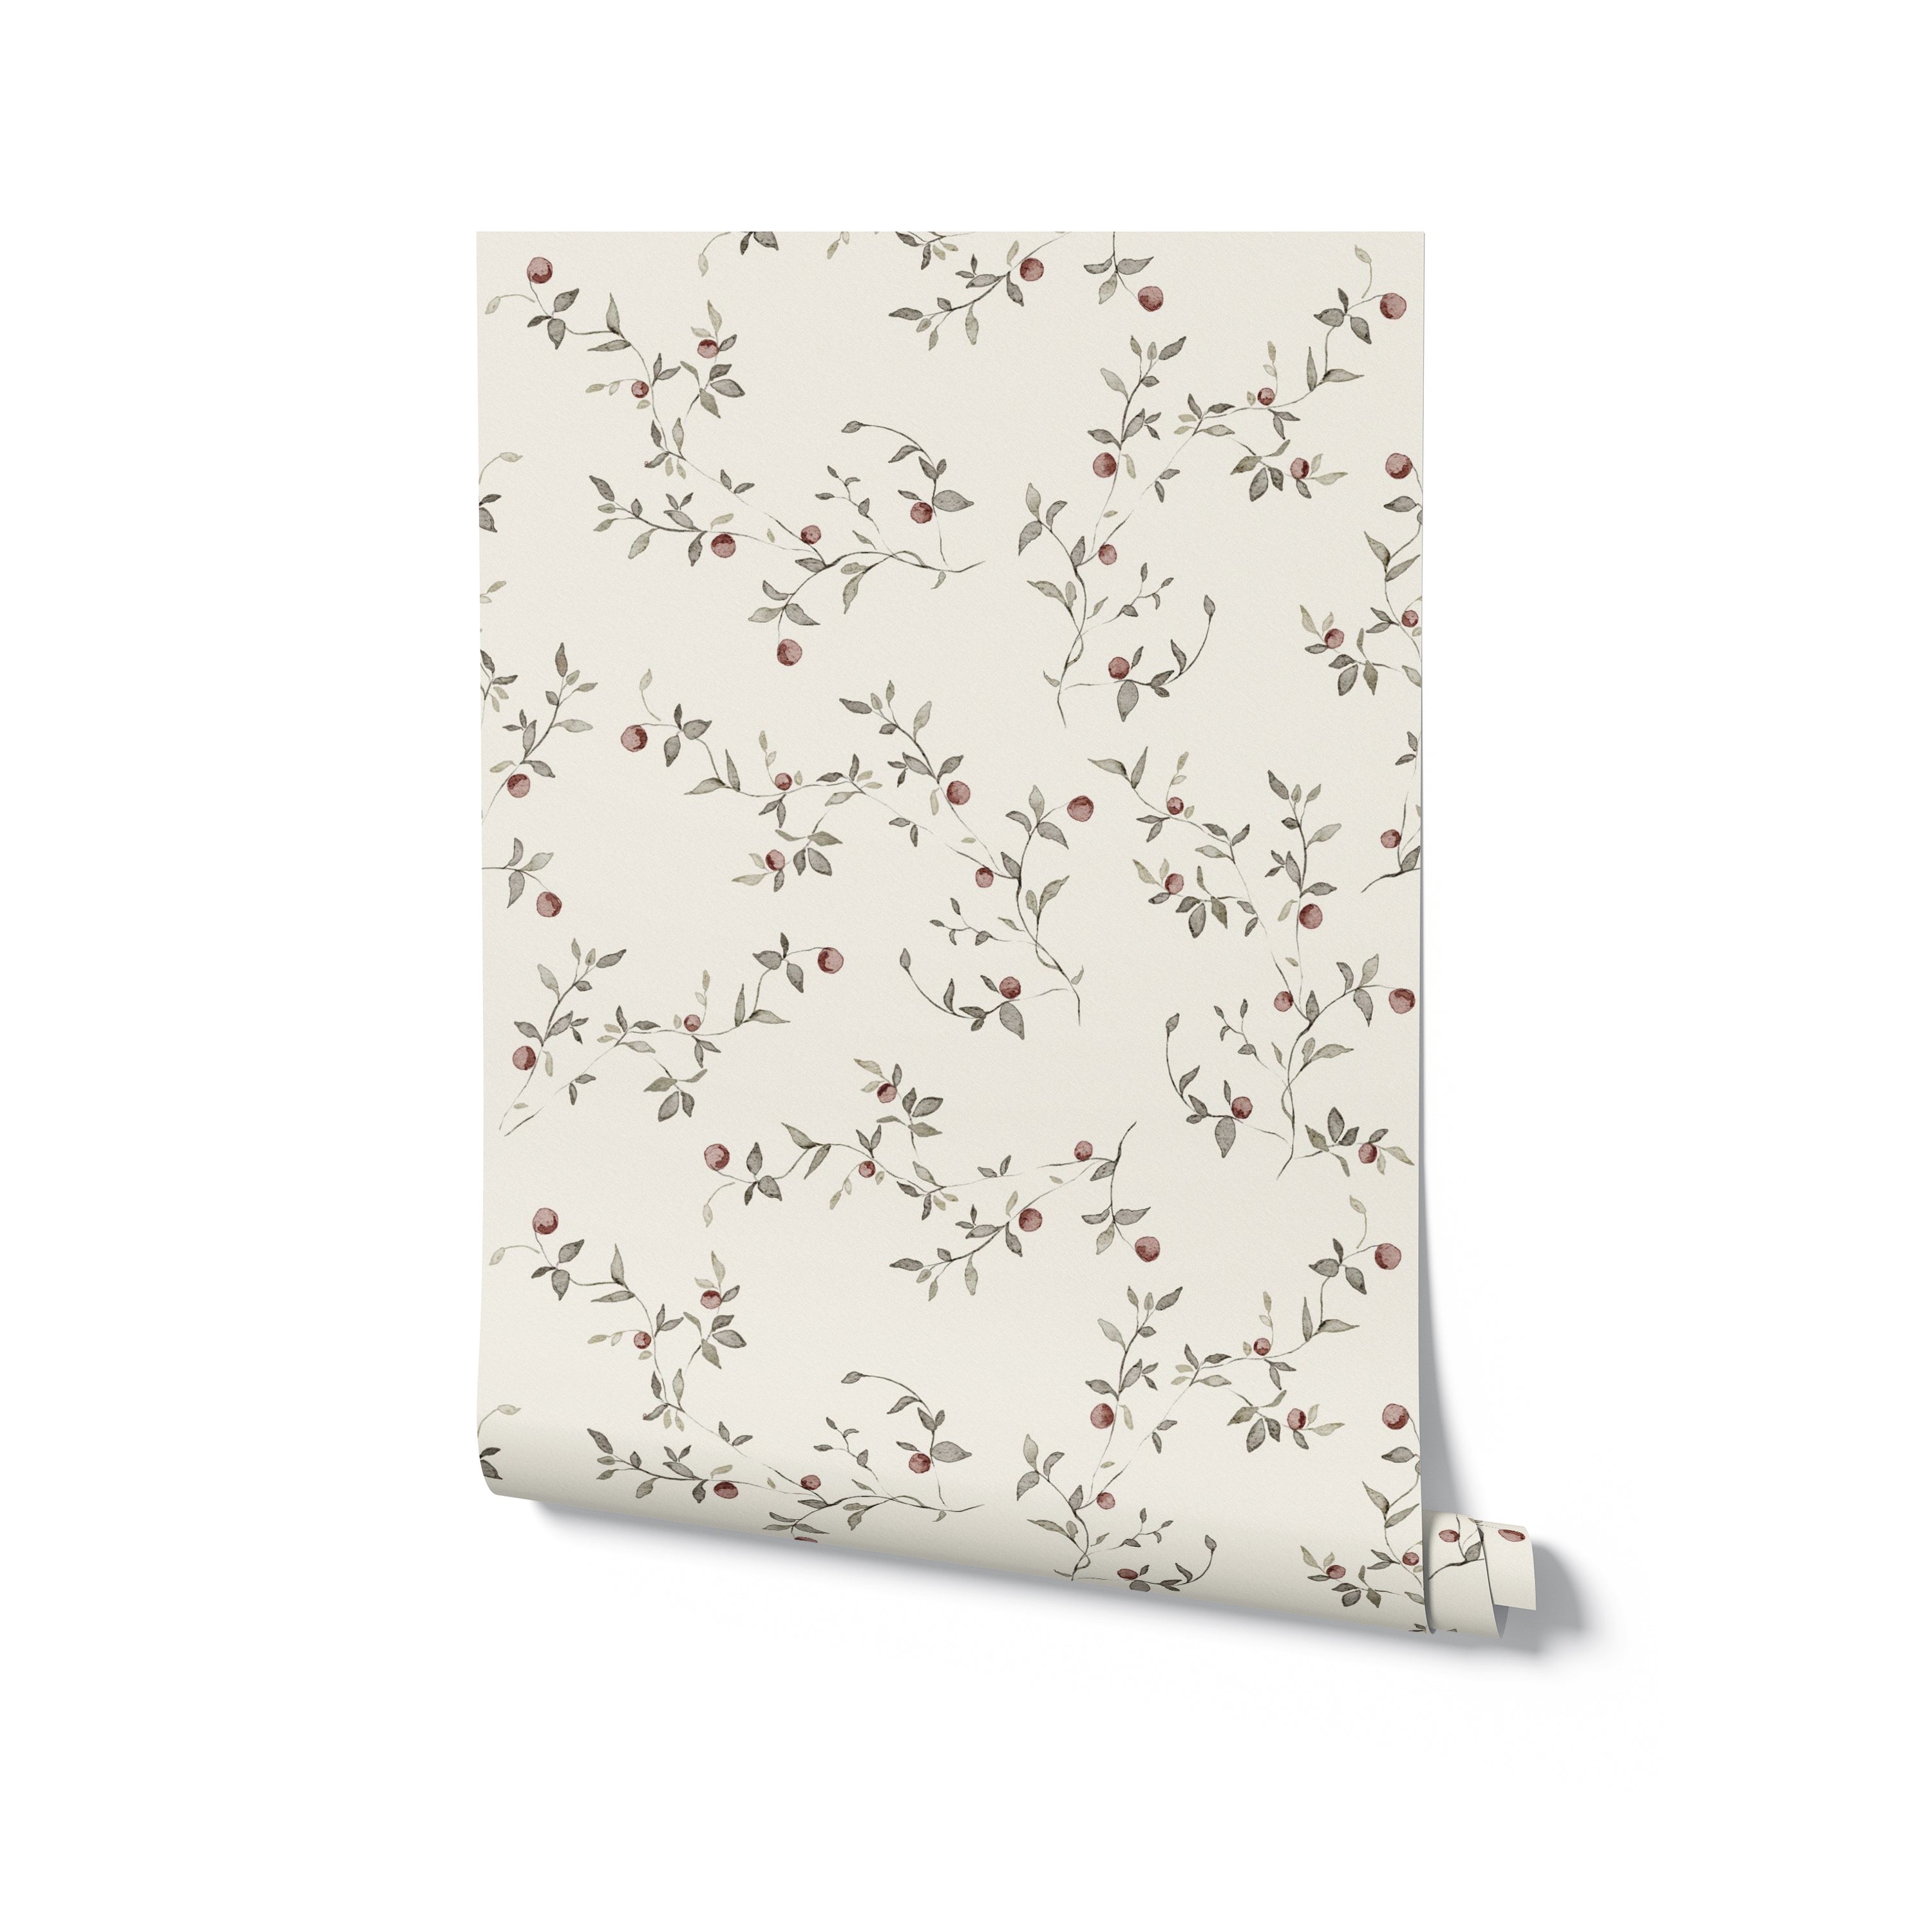 Cranberry Branches Wallpaper roll showcasing its delicate pattern of cranberry branches with small berries and leaves on a light background, perfect for adding a touch of nature to any room.